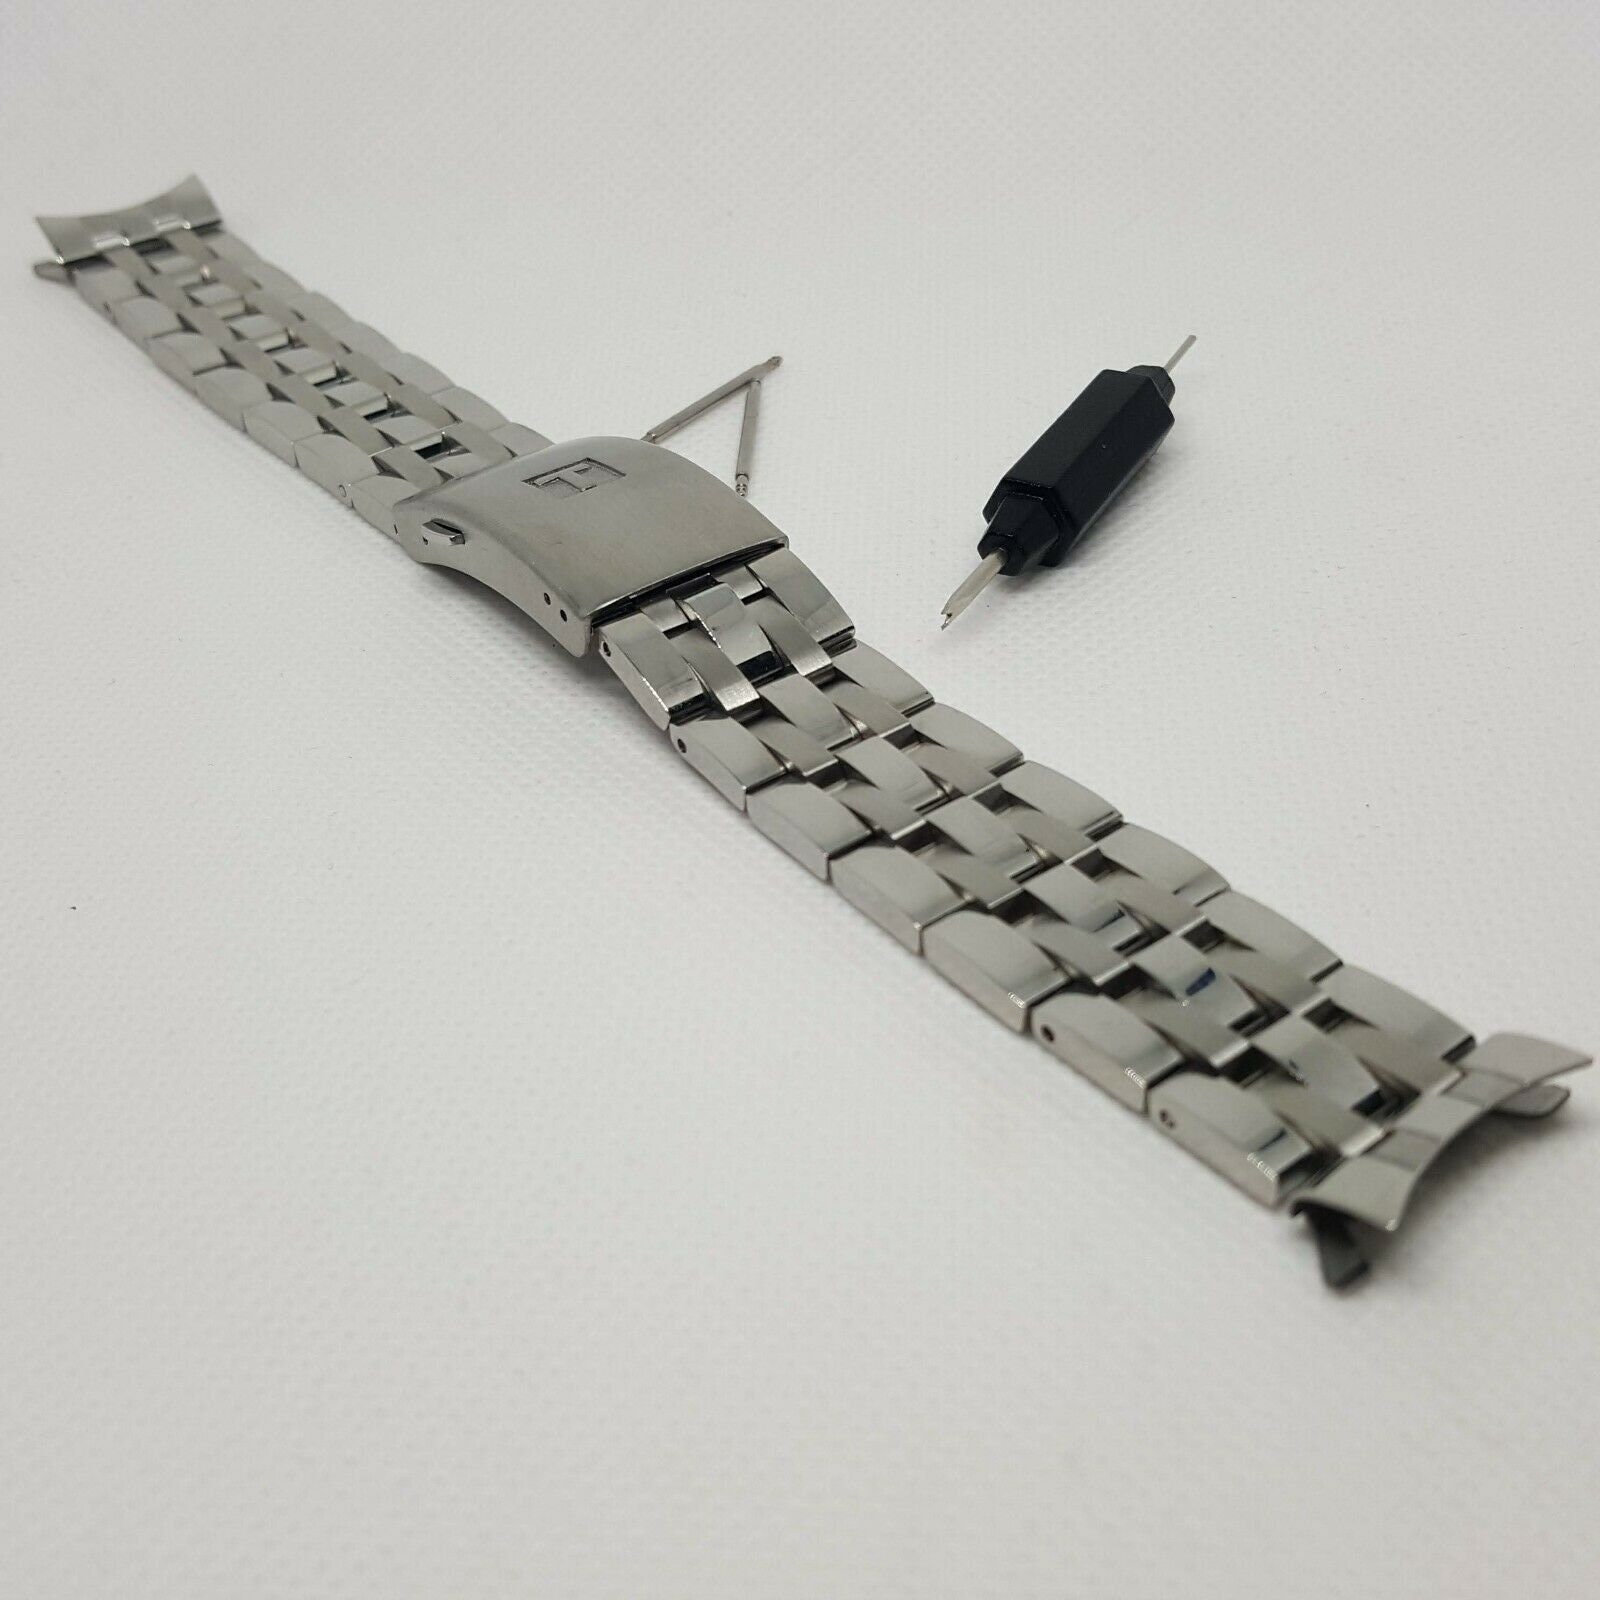 Tissot Compatible Black Stainless Steel Links Bracelet Replacement Watch  Band Strap Double Clasp #5002